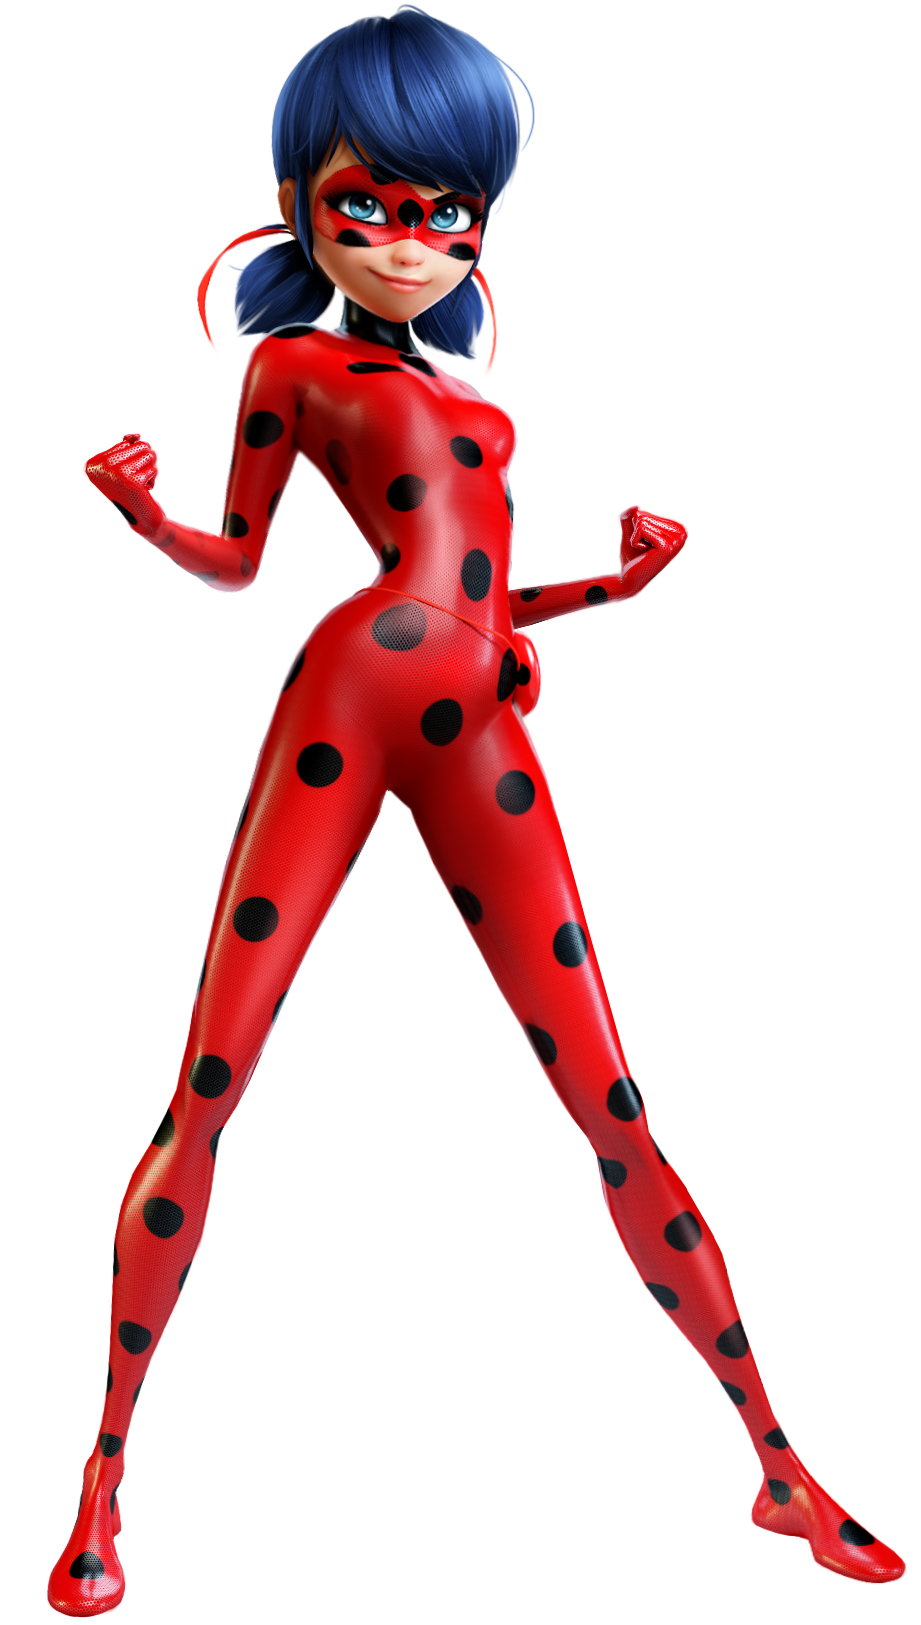 alexey konstantinov recommends Show Me A Picture Of Ladybug From Miraculous